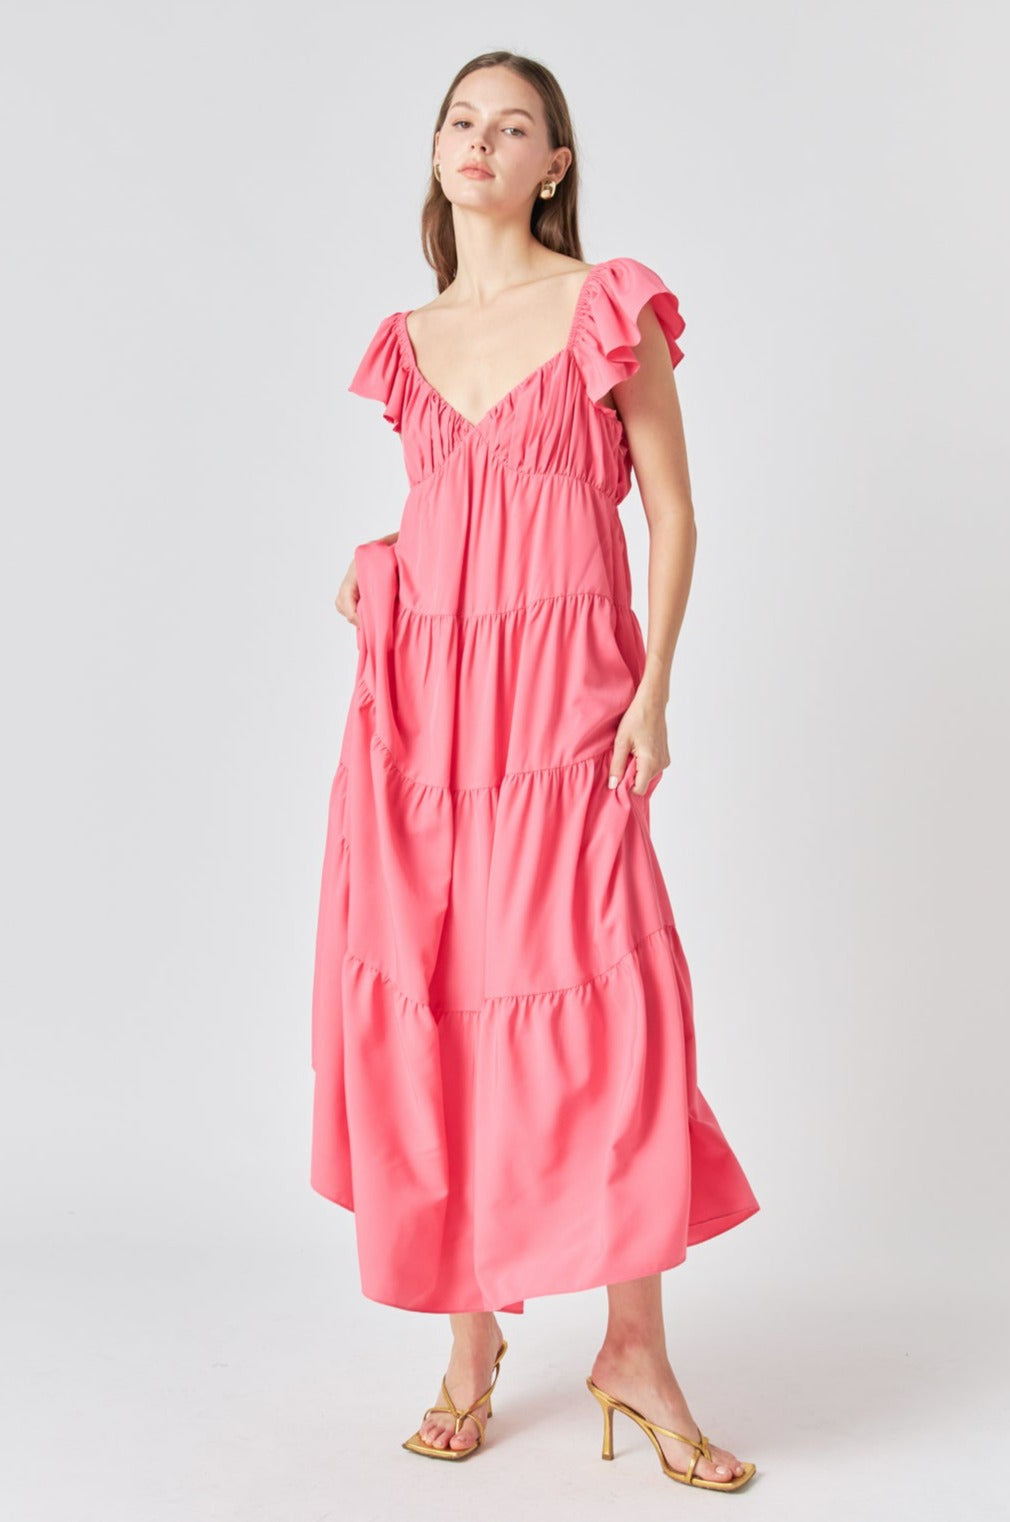 ENDLESS ROSE - Back Bow Tie Maxi Dress - DRESSES available at Objectrare